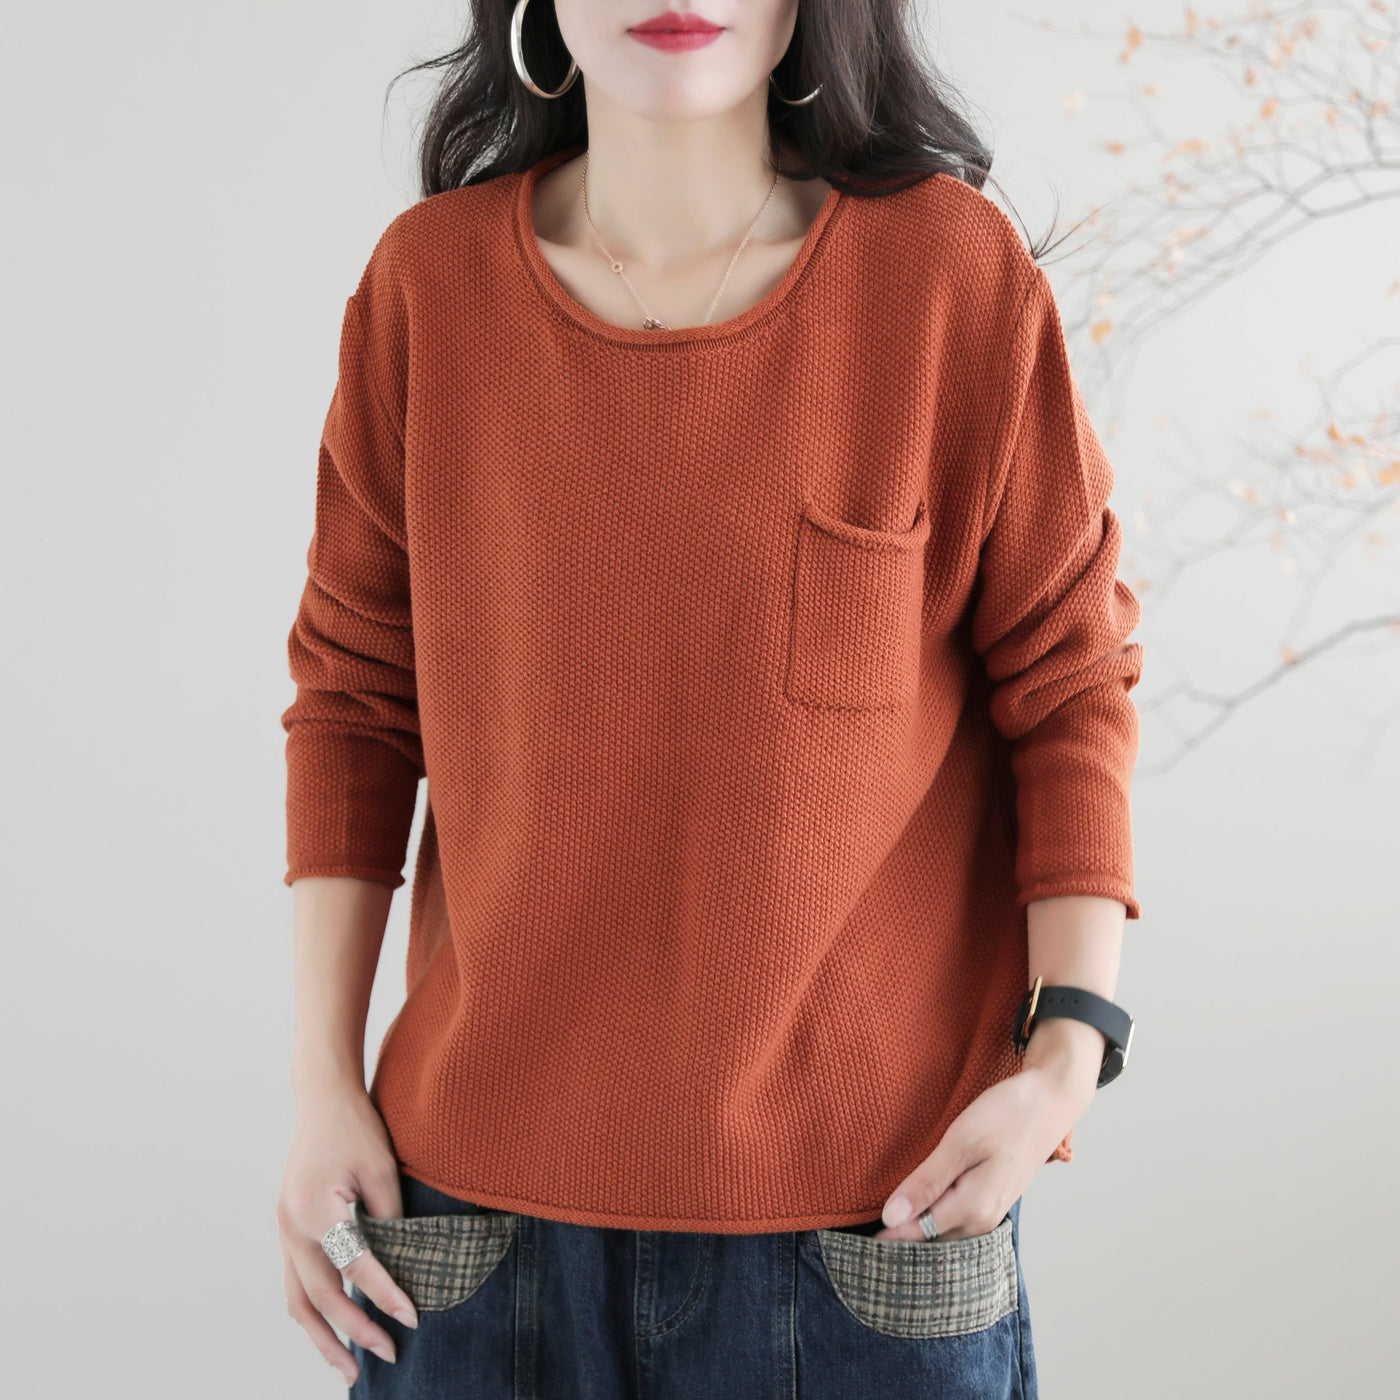 Women Autumn Solid Retro Cotton Knitted Sweater Aug 2022 New Arrival One Size Orange 